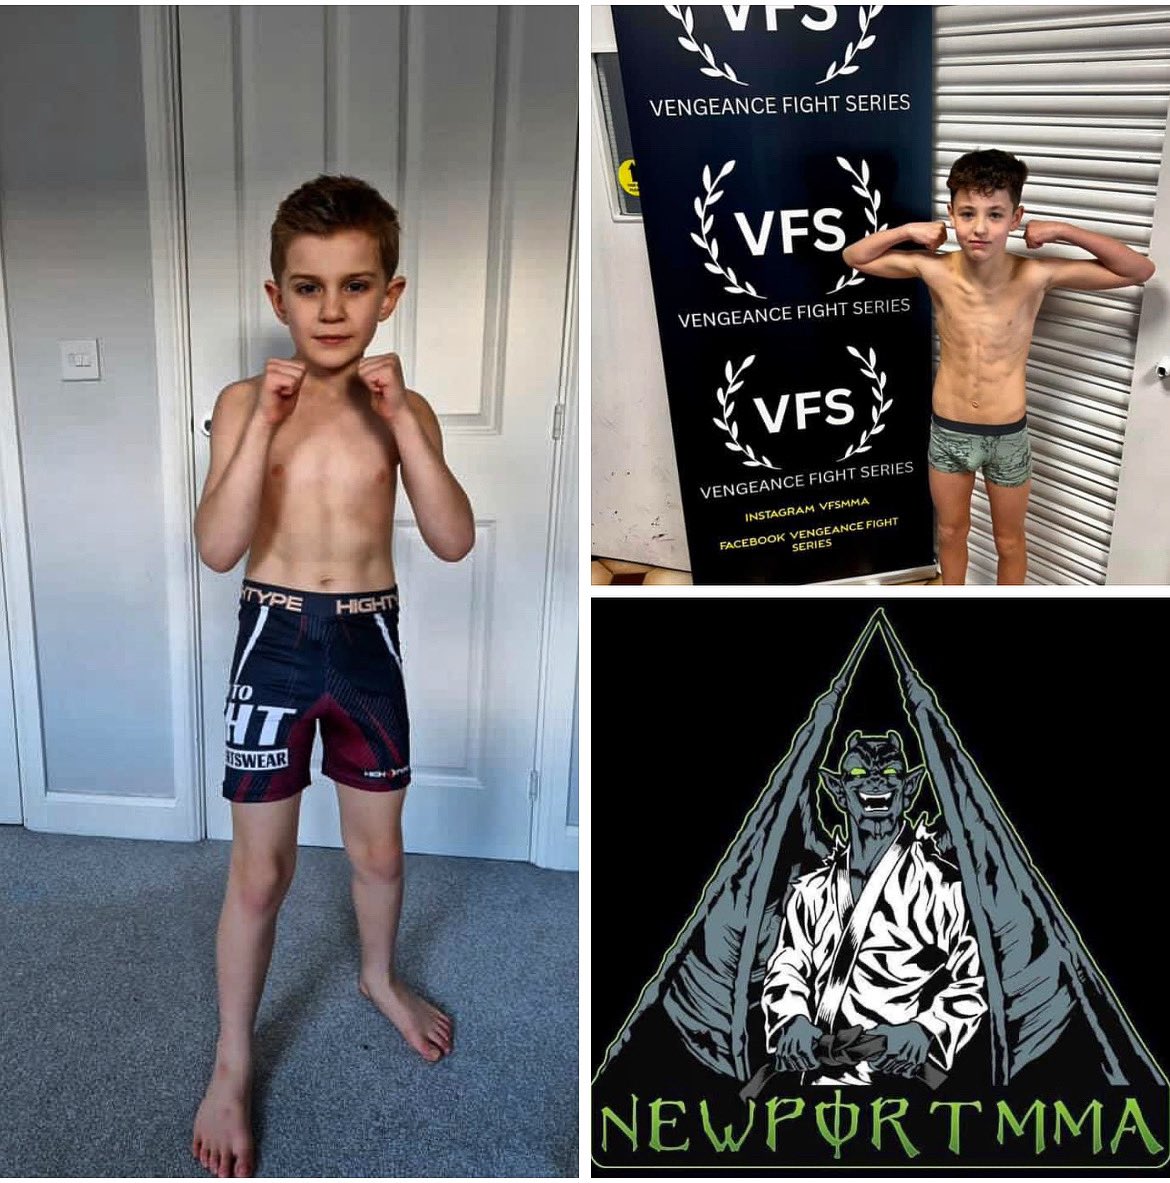 Welsh Rocky - sporting 📰 🤼‍♀️🥊🏴󠁧󠁢󠁥󠁮󠁧󠁿 📢 Archie Fielding & Finn Pearce of Newport MMA are scheduled to fight at Vegence MMA in St Helens in today 🏟️ 🏴󠁧󠁢󠁥󠁮󠁧󠁿 ➡️ Best wishes to Archie and Finn 💙 and Wayne who will be coaching them 🤝👏🏻🙌🏼 #vengencemma #newportmma #mmayouth #ATF #frp13